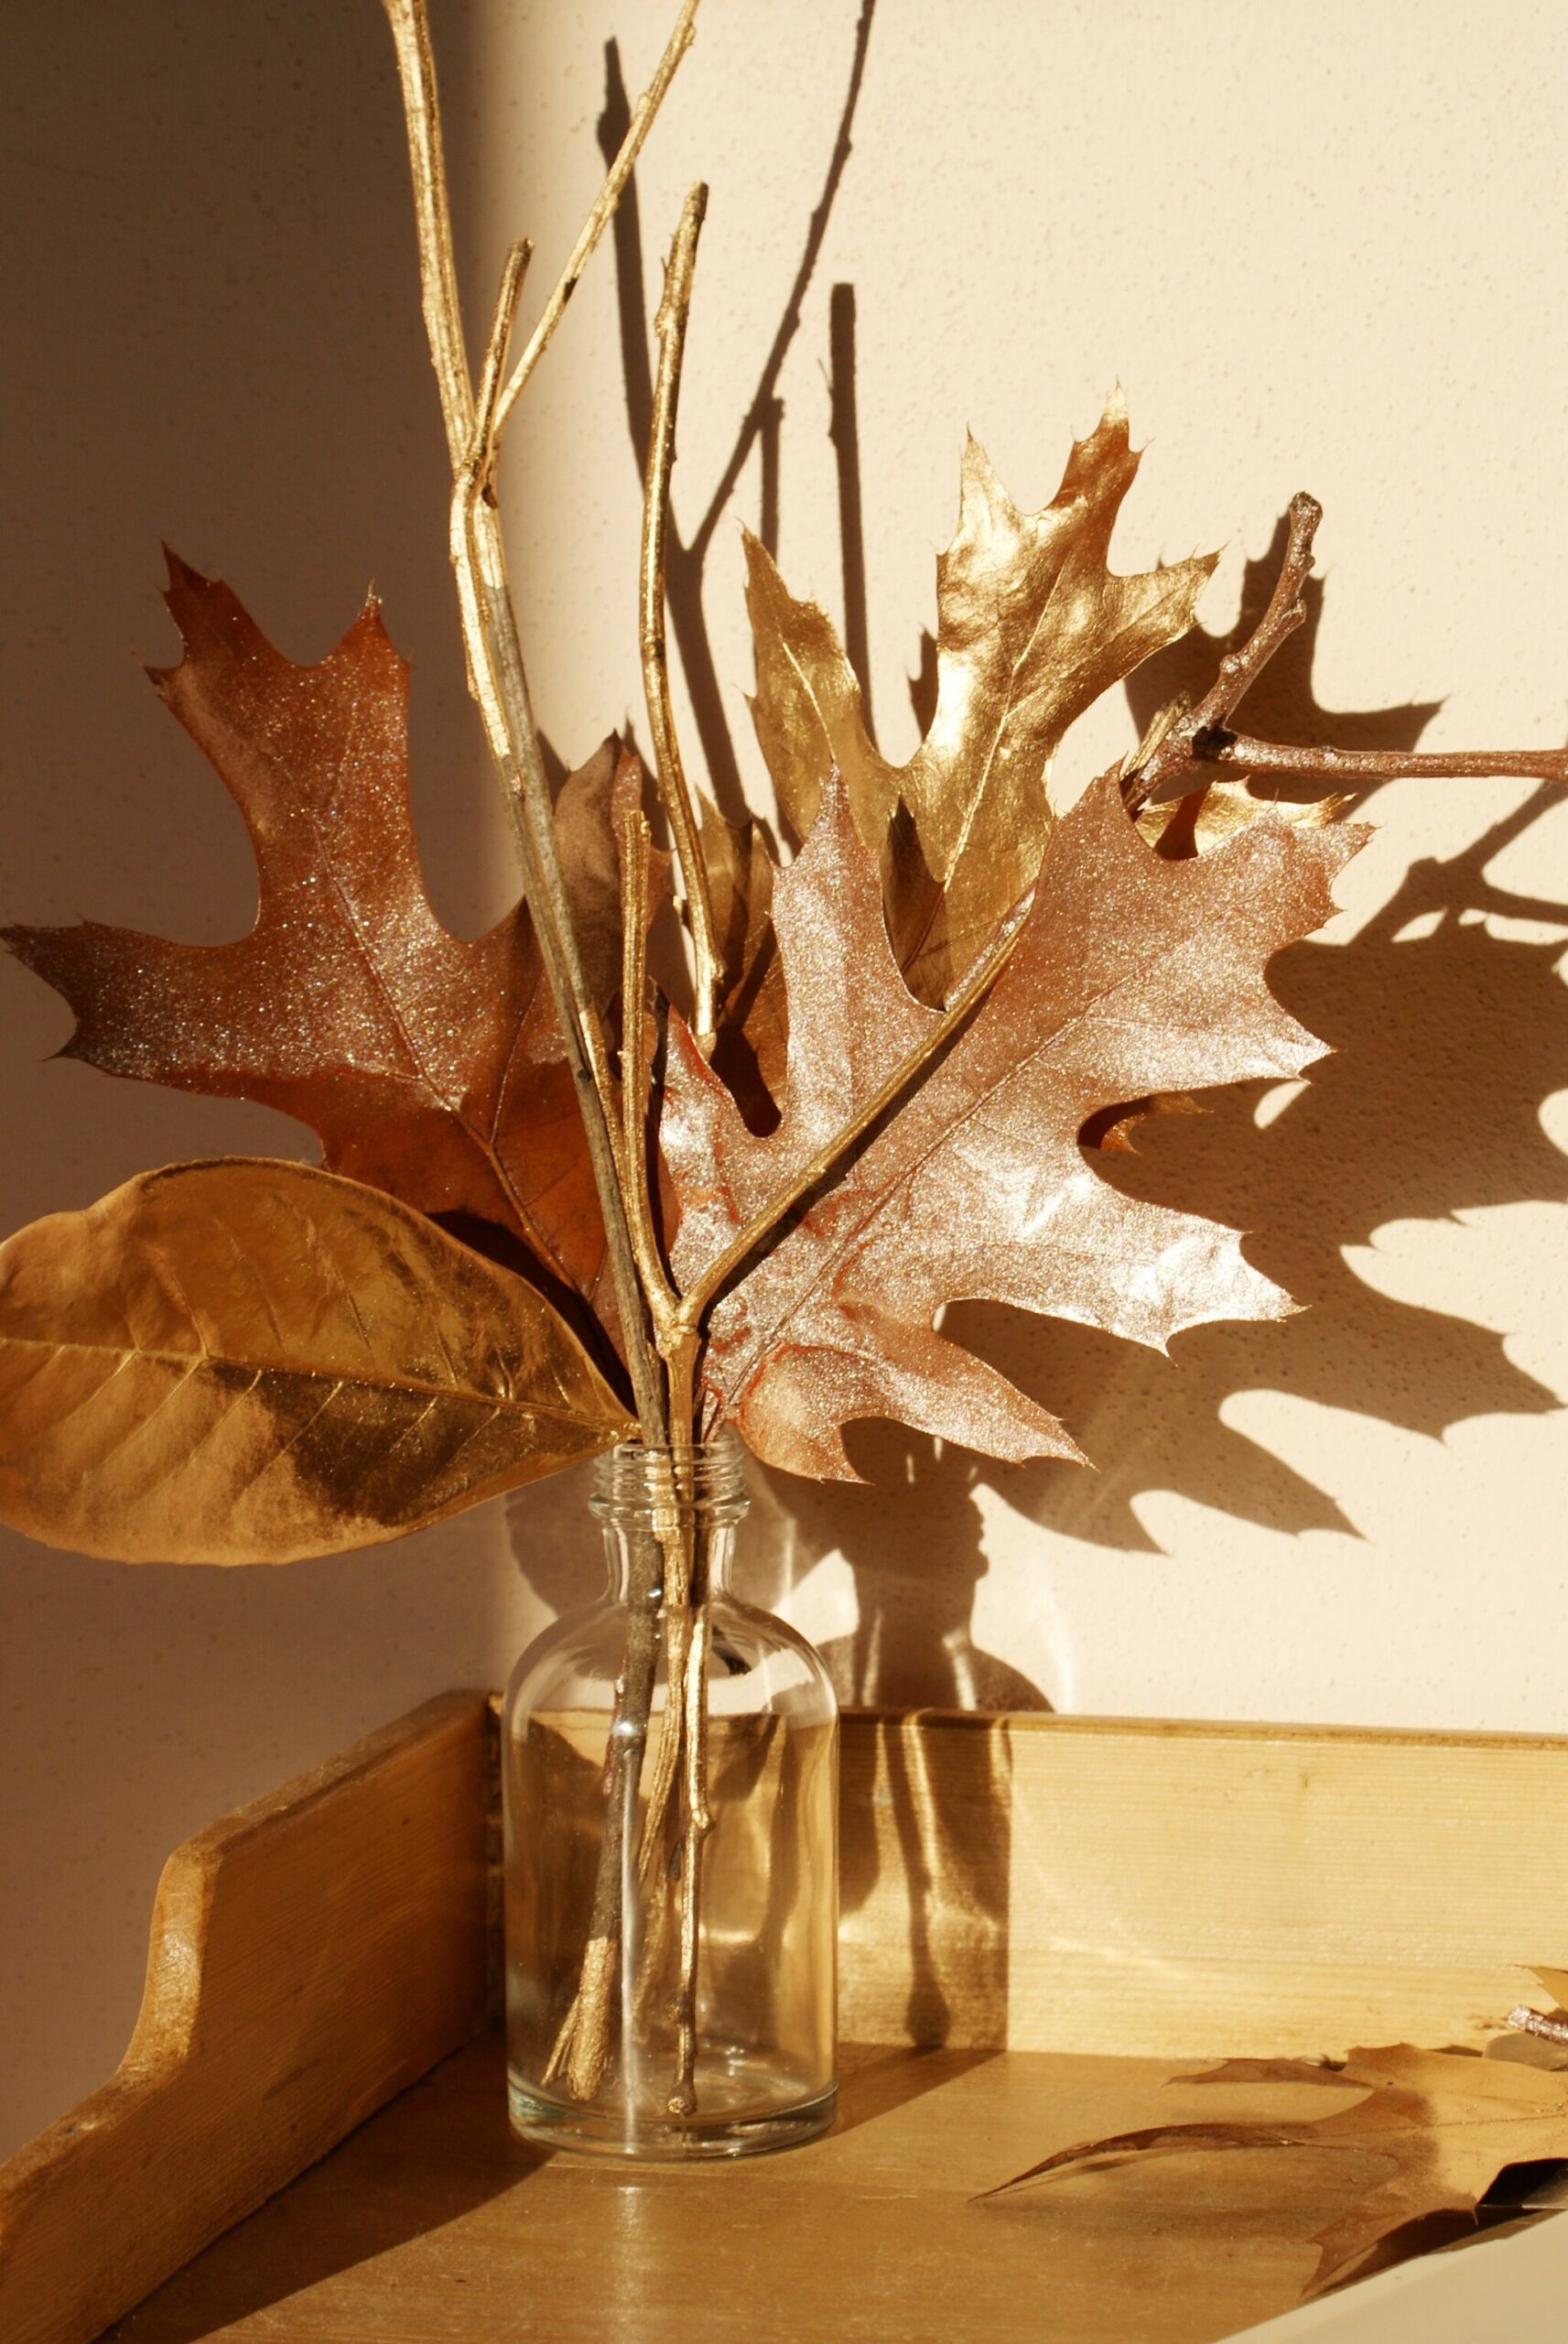 painted golden copper leaves fall decor idea luxurious home sprigs decoration francinesplaceblog